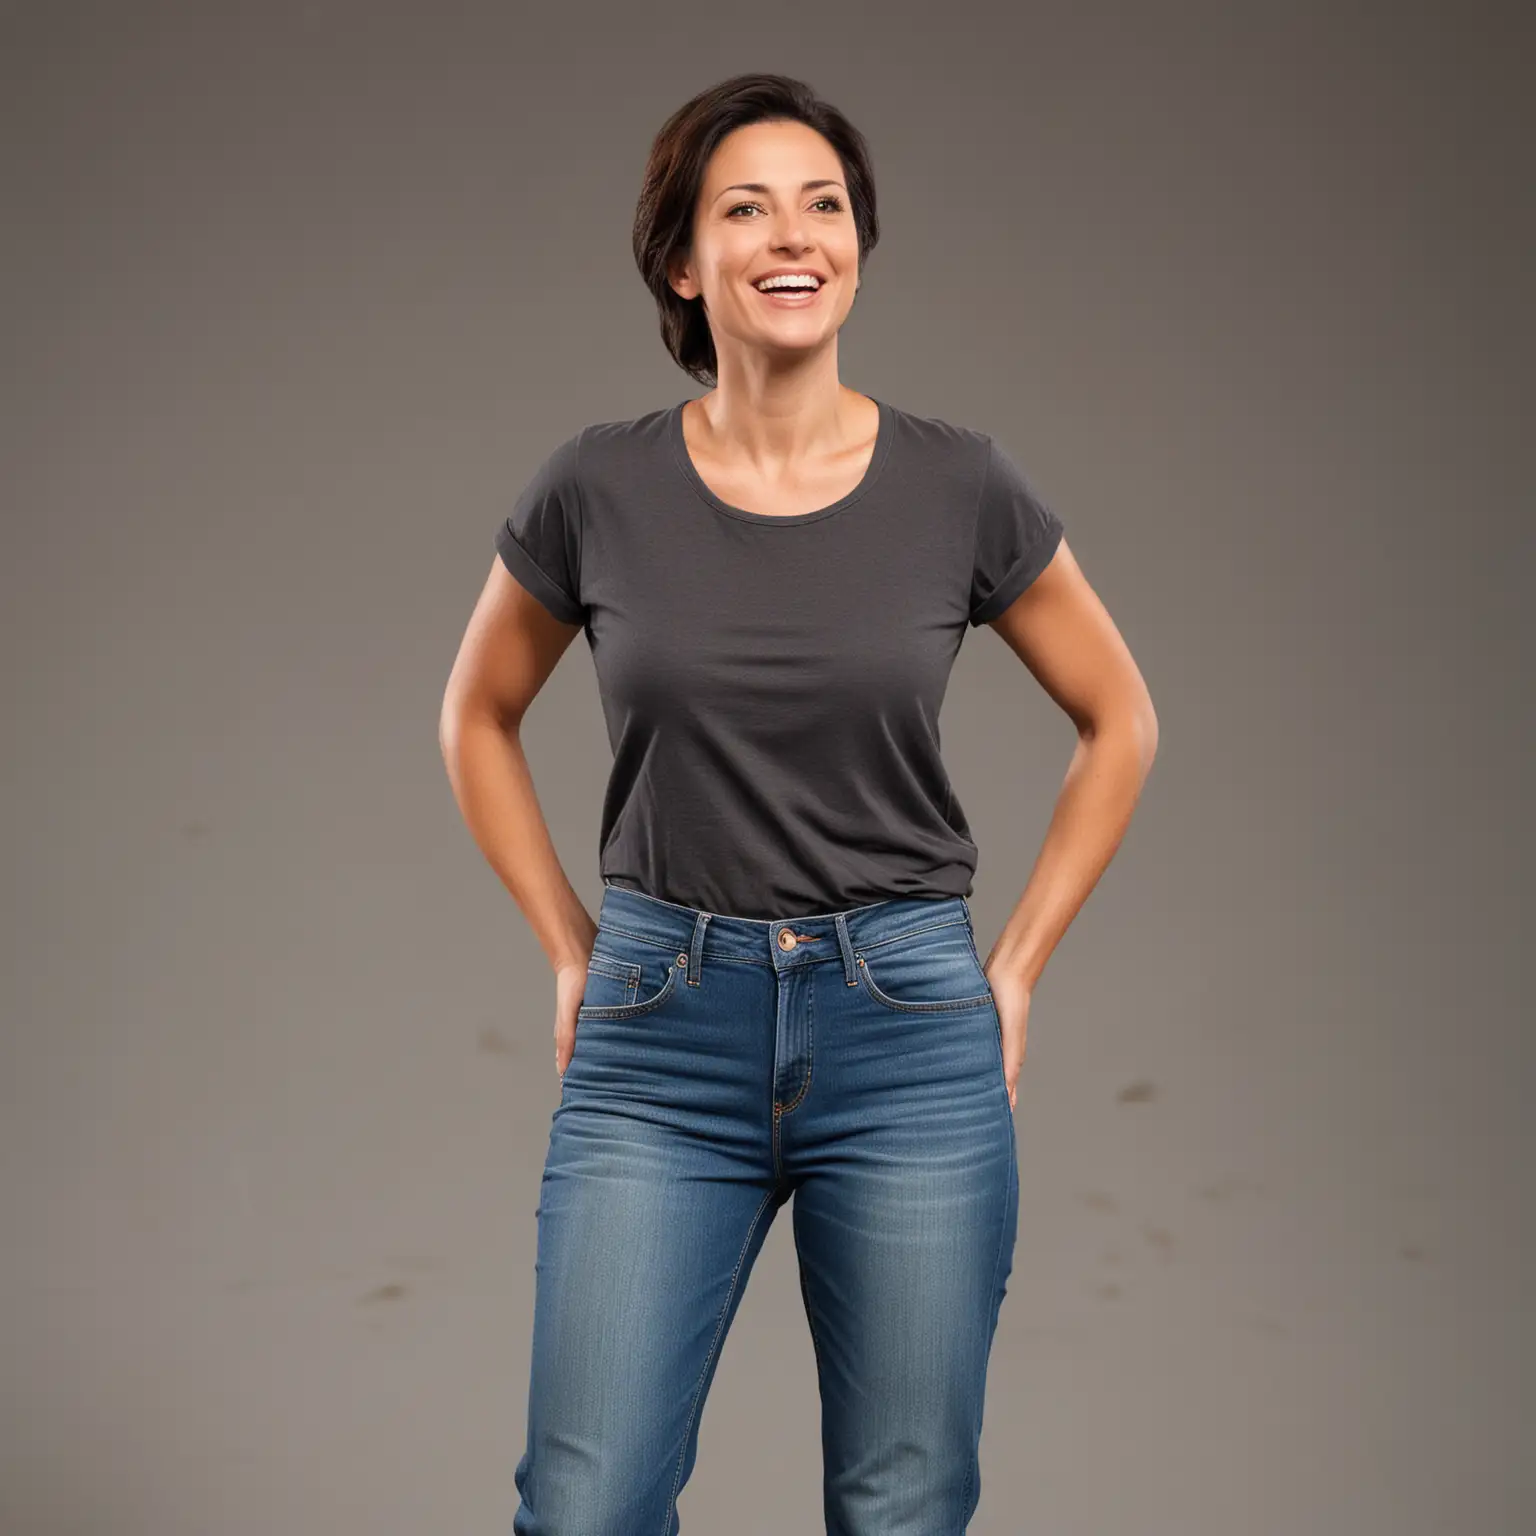 A womanA woman in her late thirties, with a confident smile, wearing a pair of comfortable jeans and a loose-fitting t-shirt. She is standing with her arms slightly open, as if she is addressing an audience, and her gaze is captivating, conveying assurance and charisma.